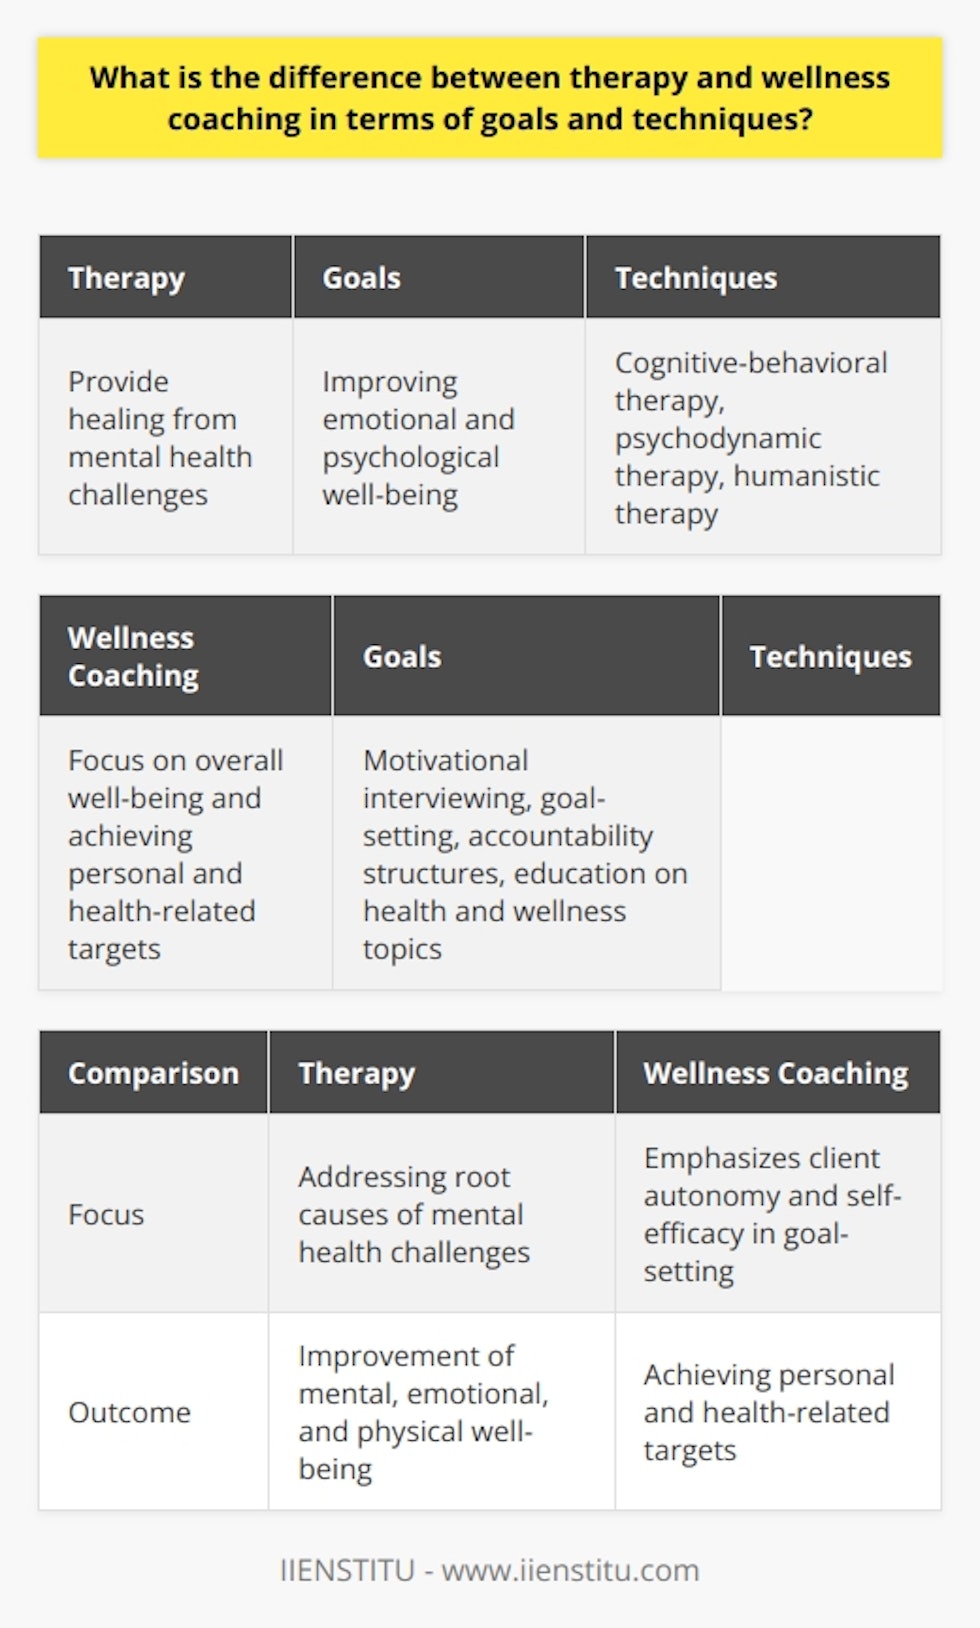 Therapy and wellness coaching have distinct goals and techniques. Therapy aims to provide healing from mental health challenges and improve emotional and psychological well-being. It utilizes techniques like cognitive-behavioral therapy, psychodynamic therapy, and humanistic therapy. On the other hand, wellness coaching focuses on overall well-being and achieving personal and health-related targets. Coaches use techniques such as motivational interviewing, goal-setting, accountability structures, and education on health and wellness topics. Collaboratively, therapy focuses on addressing root causes of mental health challenges, whereas wellness coaching emphasizes client autonomy and self-efficacy in setting goals and developing actionable plans. Ultimately, the choice between therapy and wellness coaching depends on individual needs and desired outcomes for mental, emotional, and physical well-being.